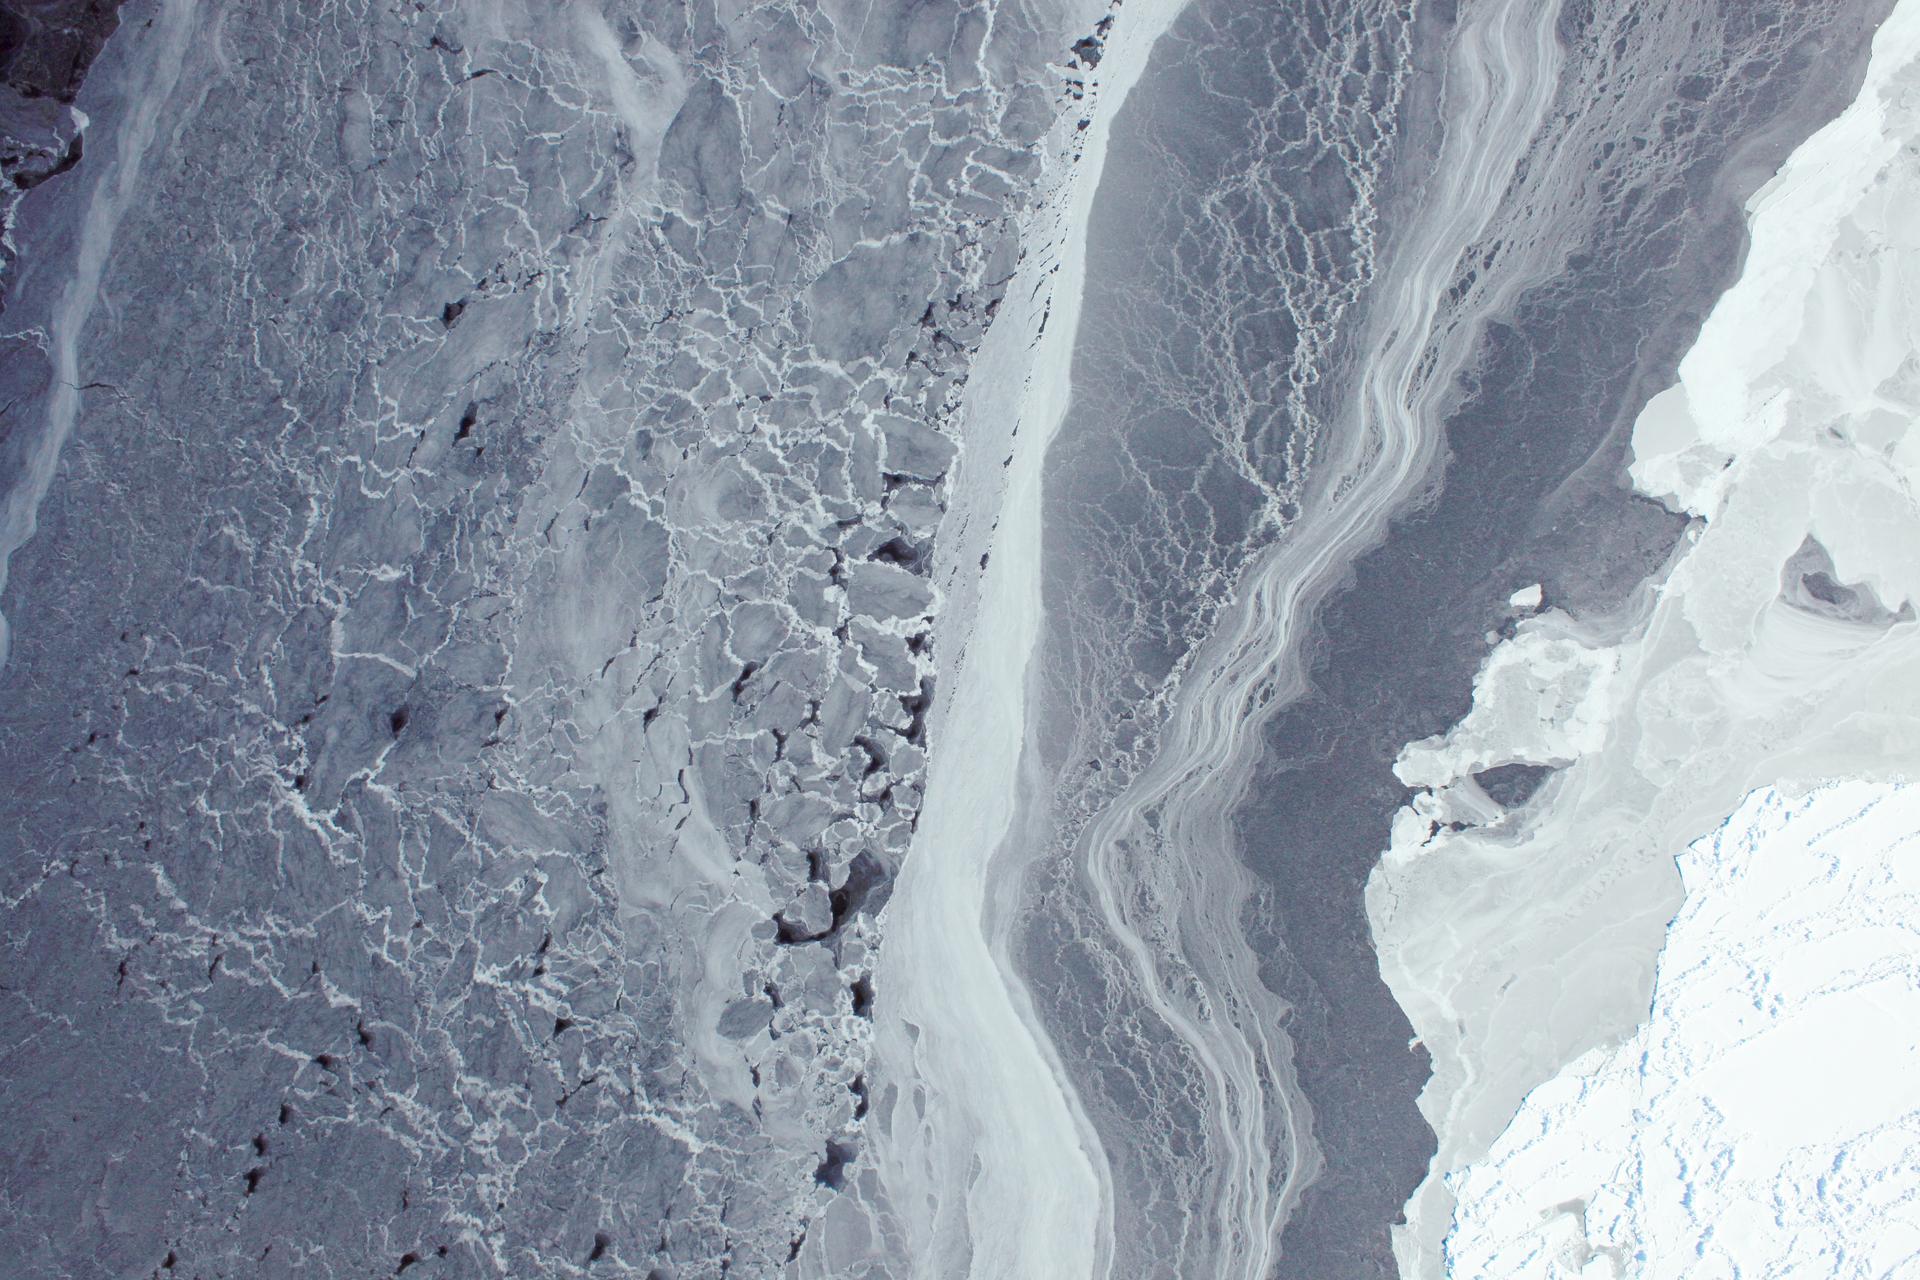 Aerial view of heavily compacted first-year sea ice along the edge of the the Amundsen Sea, captured by the NASA IceBridge Project Team, October 16, 2009 (credit: IceBridge DMS L0 Raw Imagery courtesy of the Digital Mapping System (DMS) team/NASA DAAC at the National Snow and Ice Data Center, public domain).